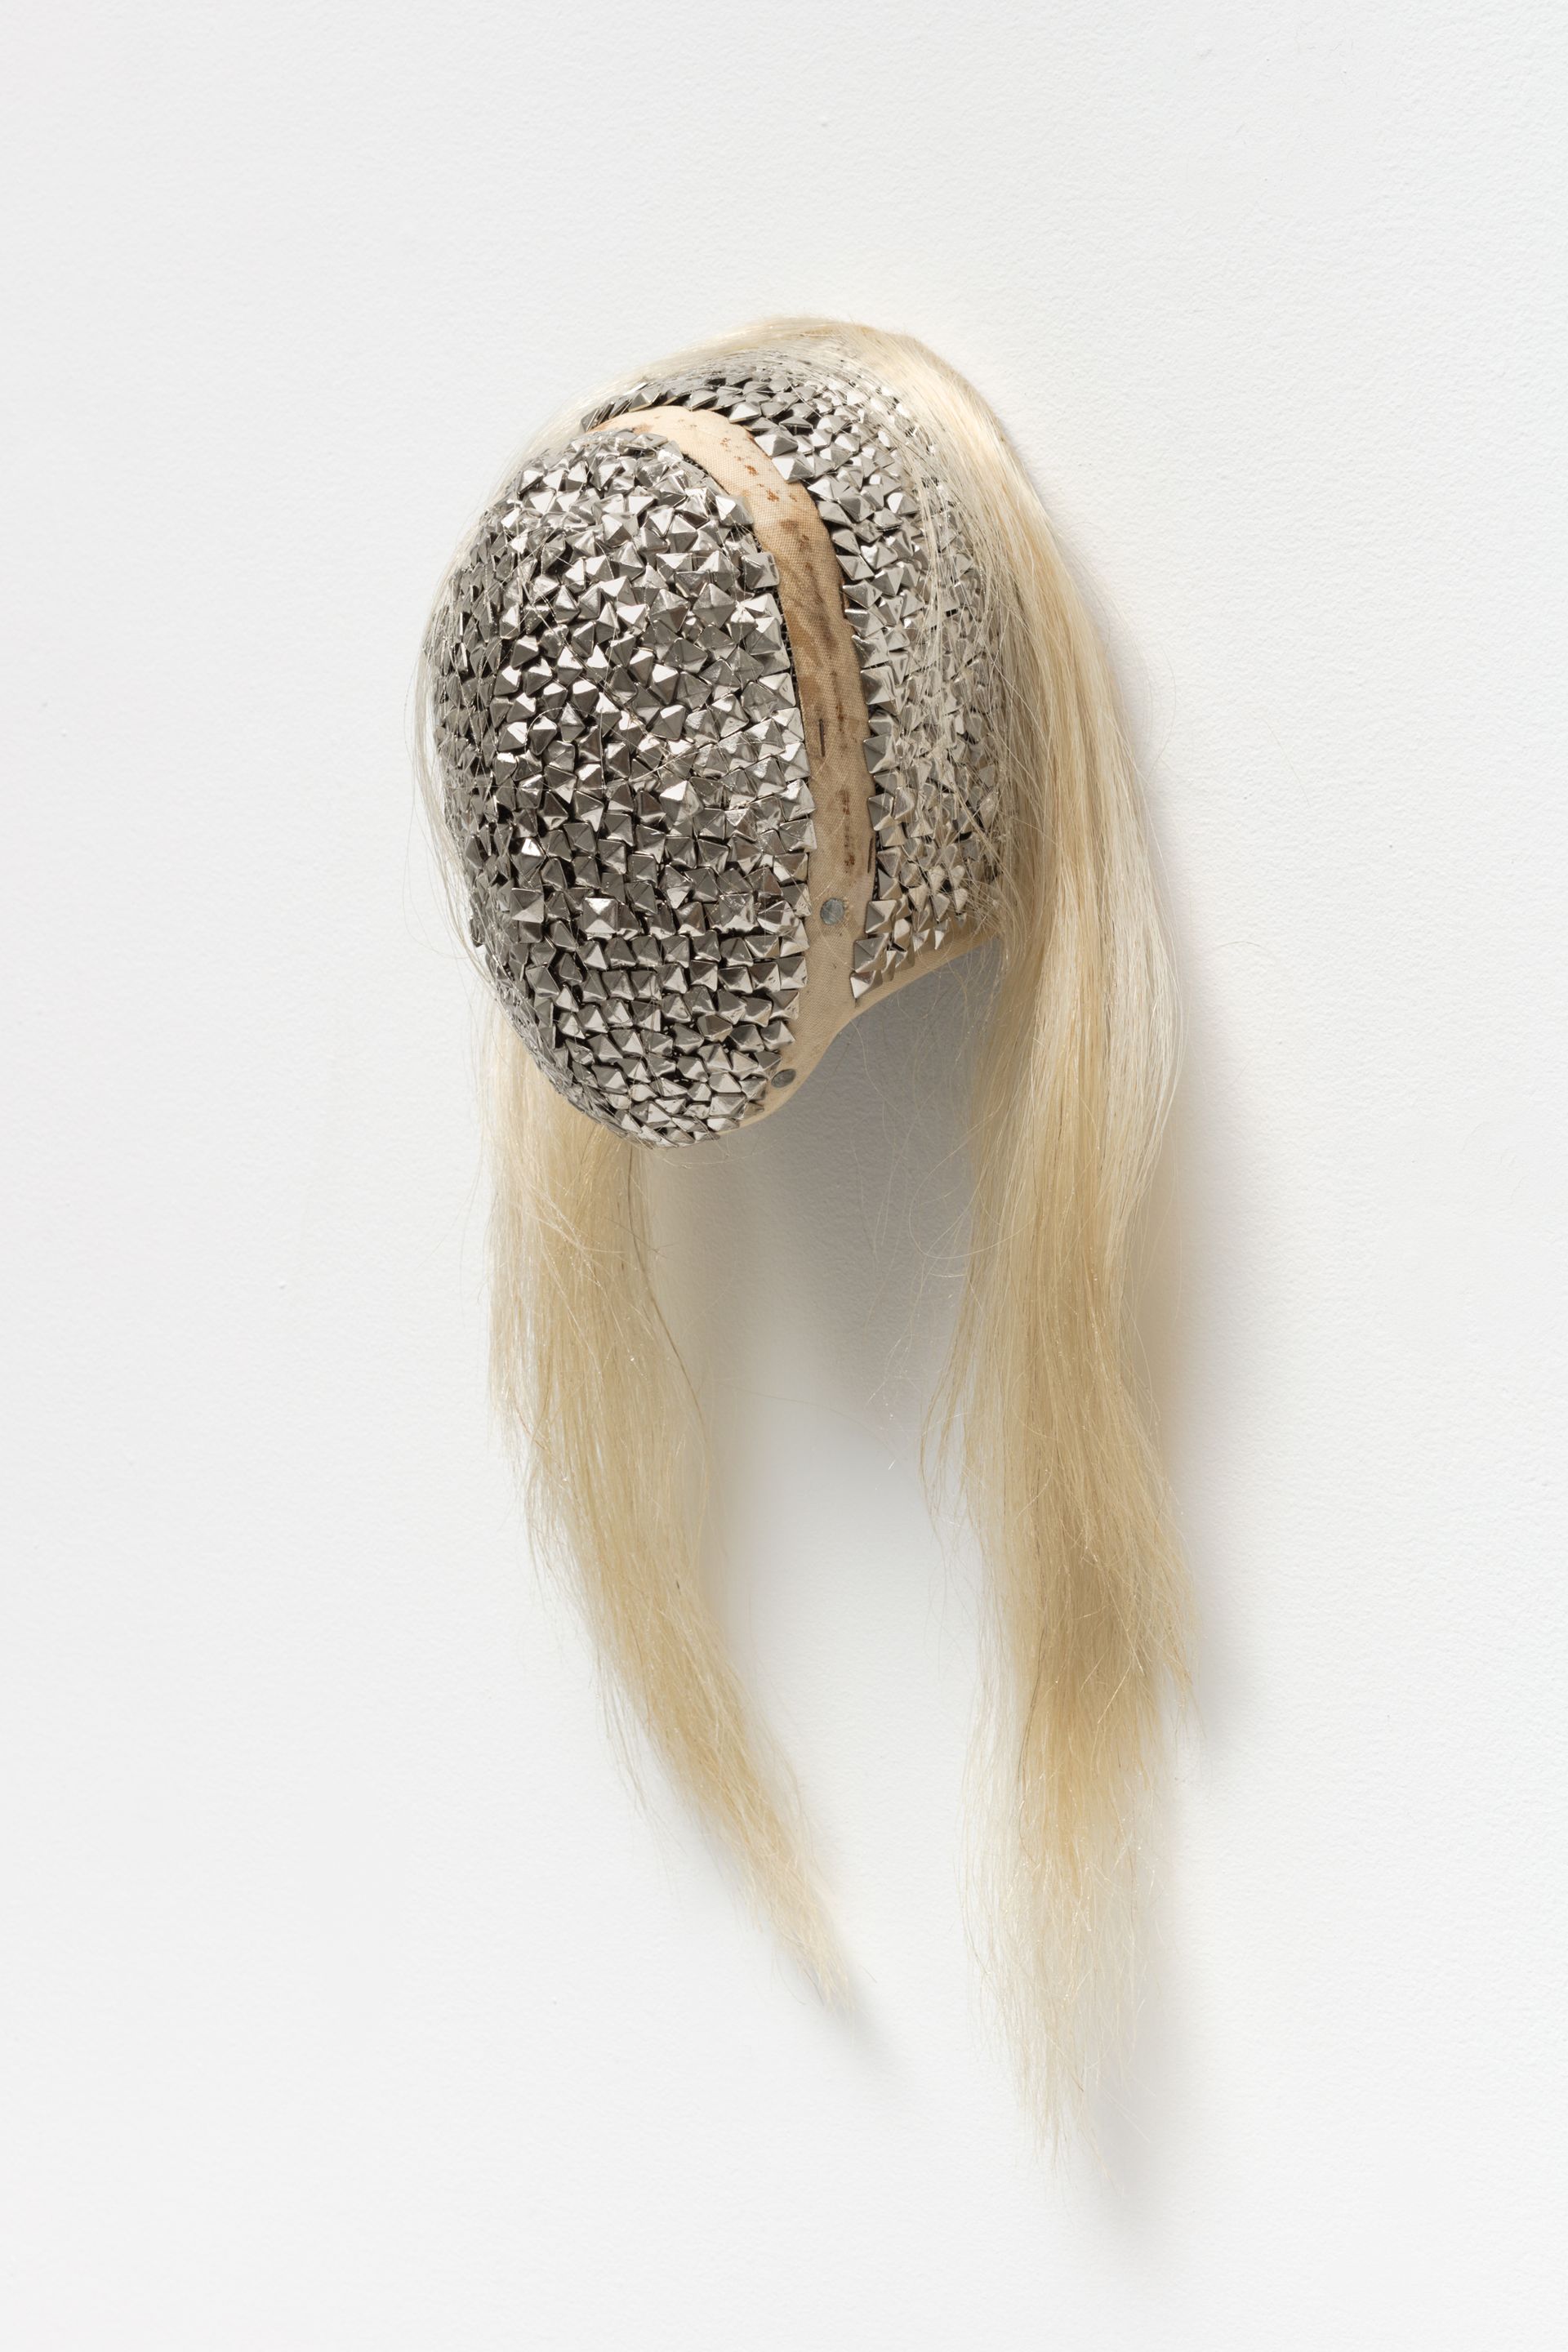 Allison Janae Hamilton's Silver Mask with Pall Mane (2021) was included in the artist's solo show at Marianne Boesky Gallery, the first for which the gallery conducted a climate impact report. Courtesy of the artist and Marianne Boesky Gallery, New York and Aspen. © Allison Janae Hamilton. Photo credit: Lance Brewer